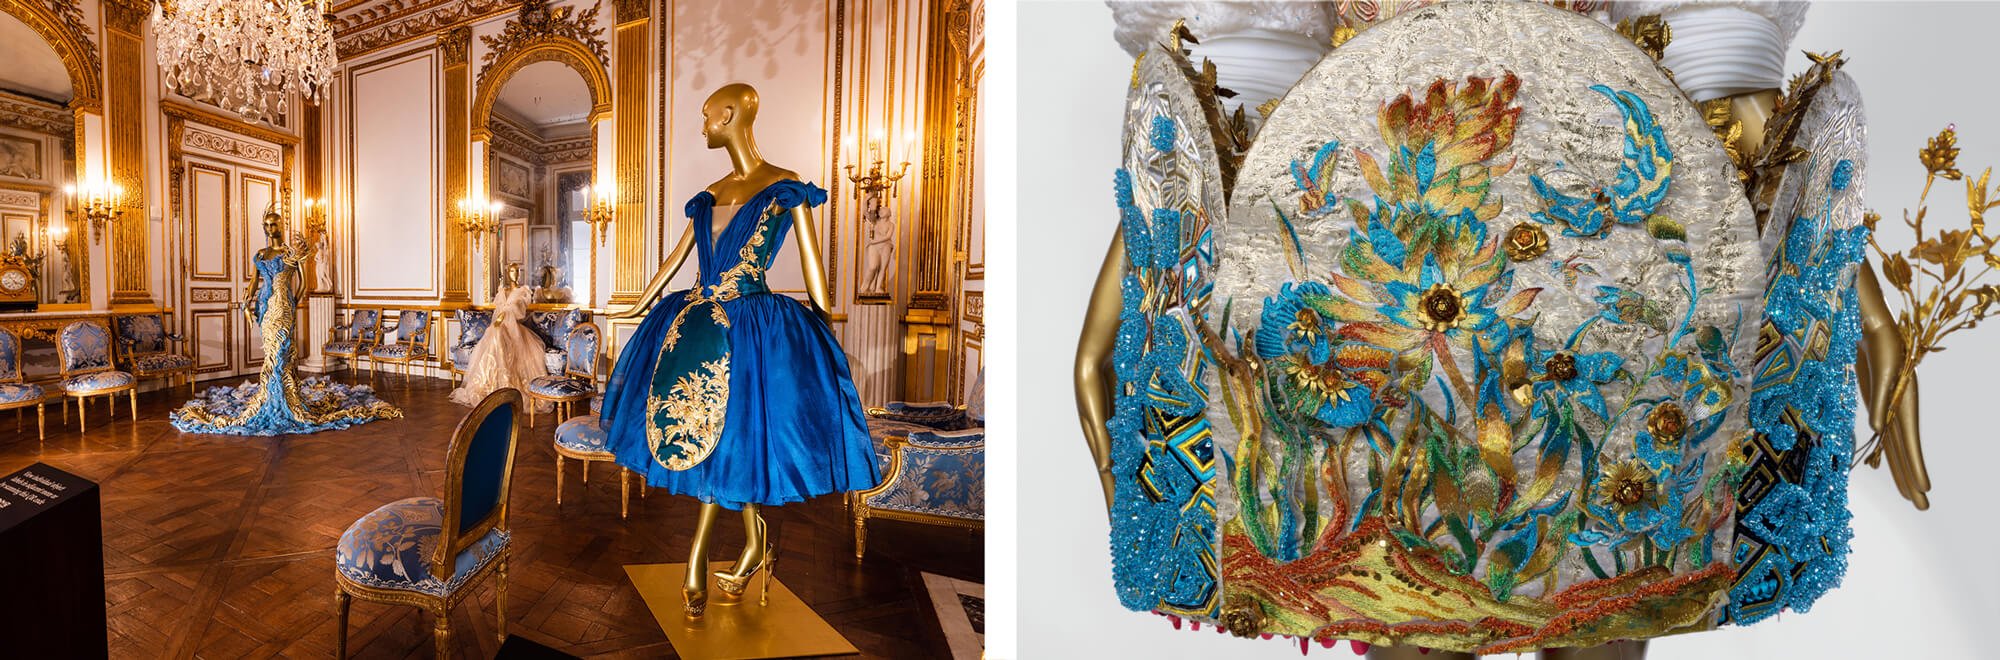 Two images: On left is an ornate ballroom with golden mannequins dressed in a variety of gowns. On right is a closeup of intricate floral embroidery.